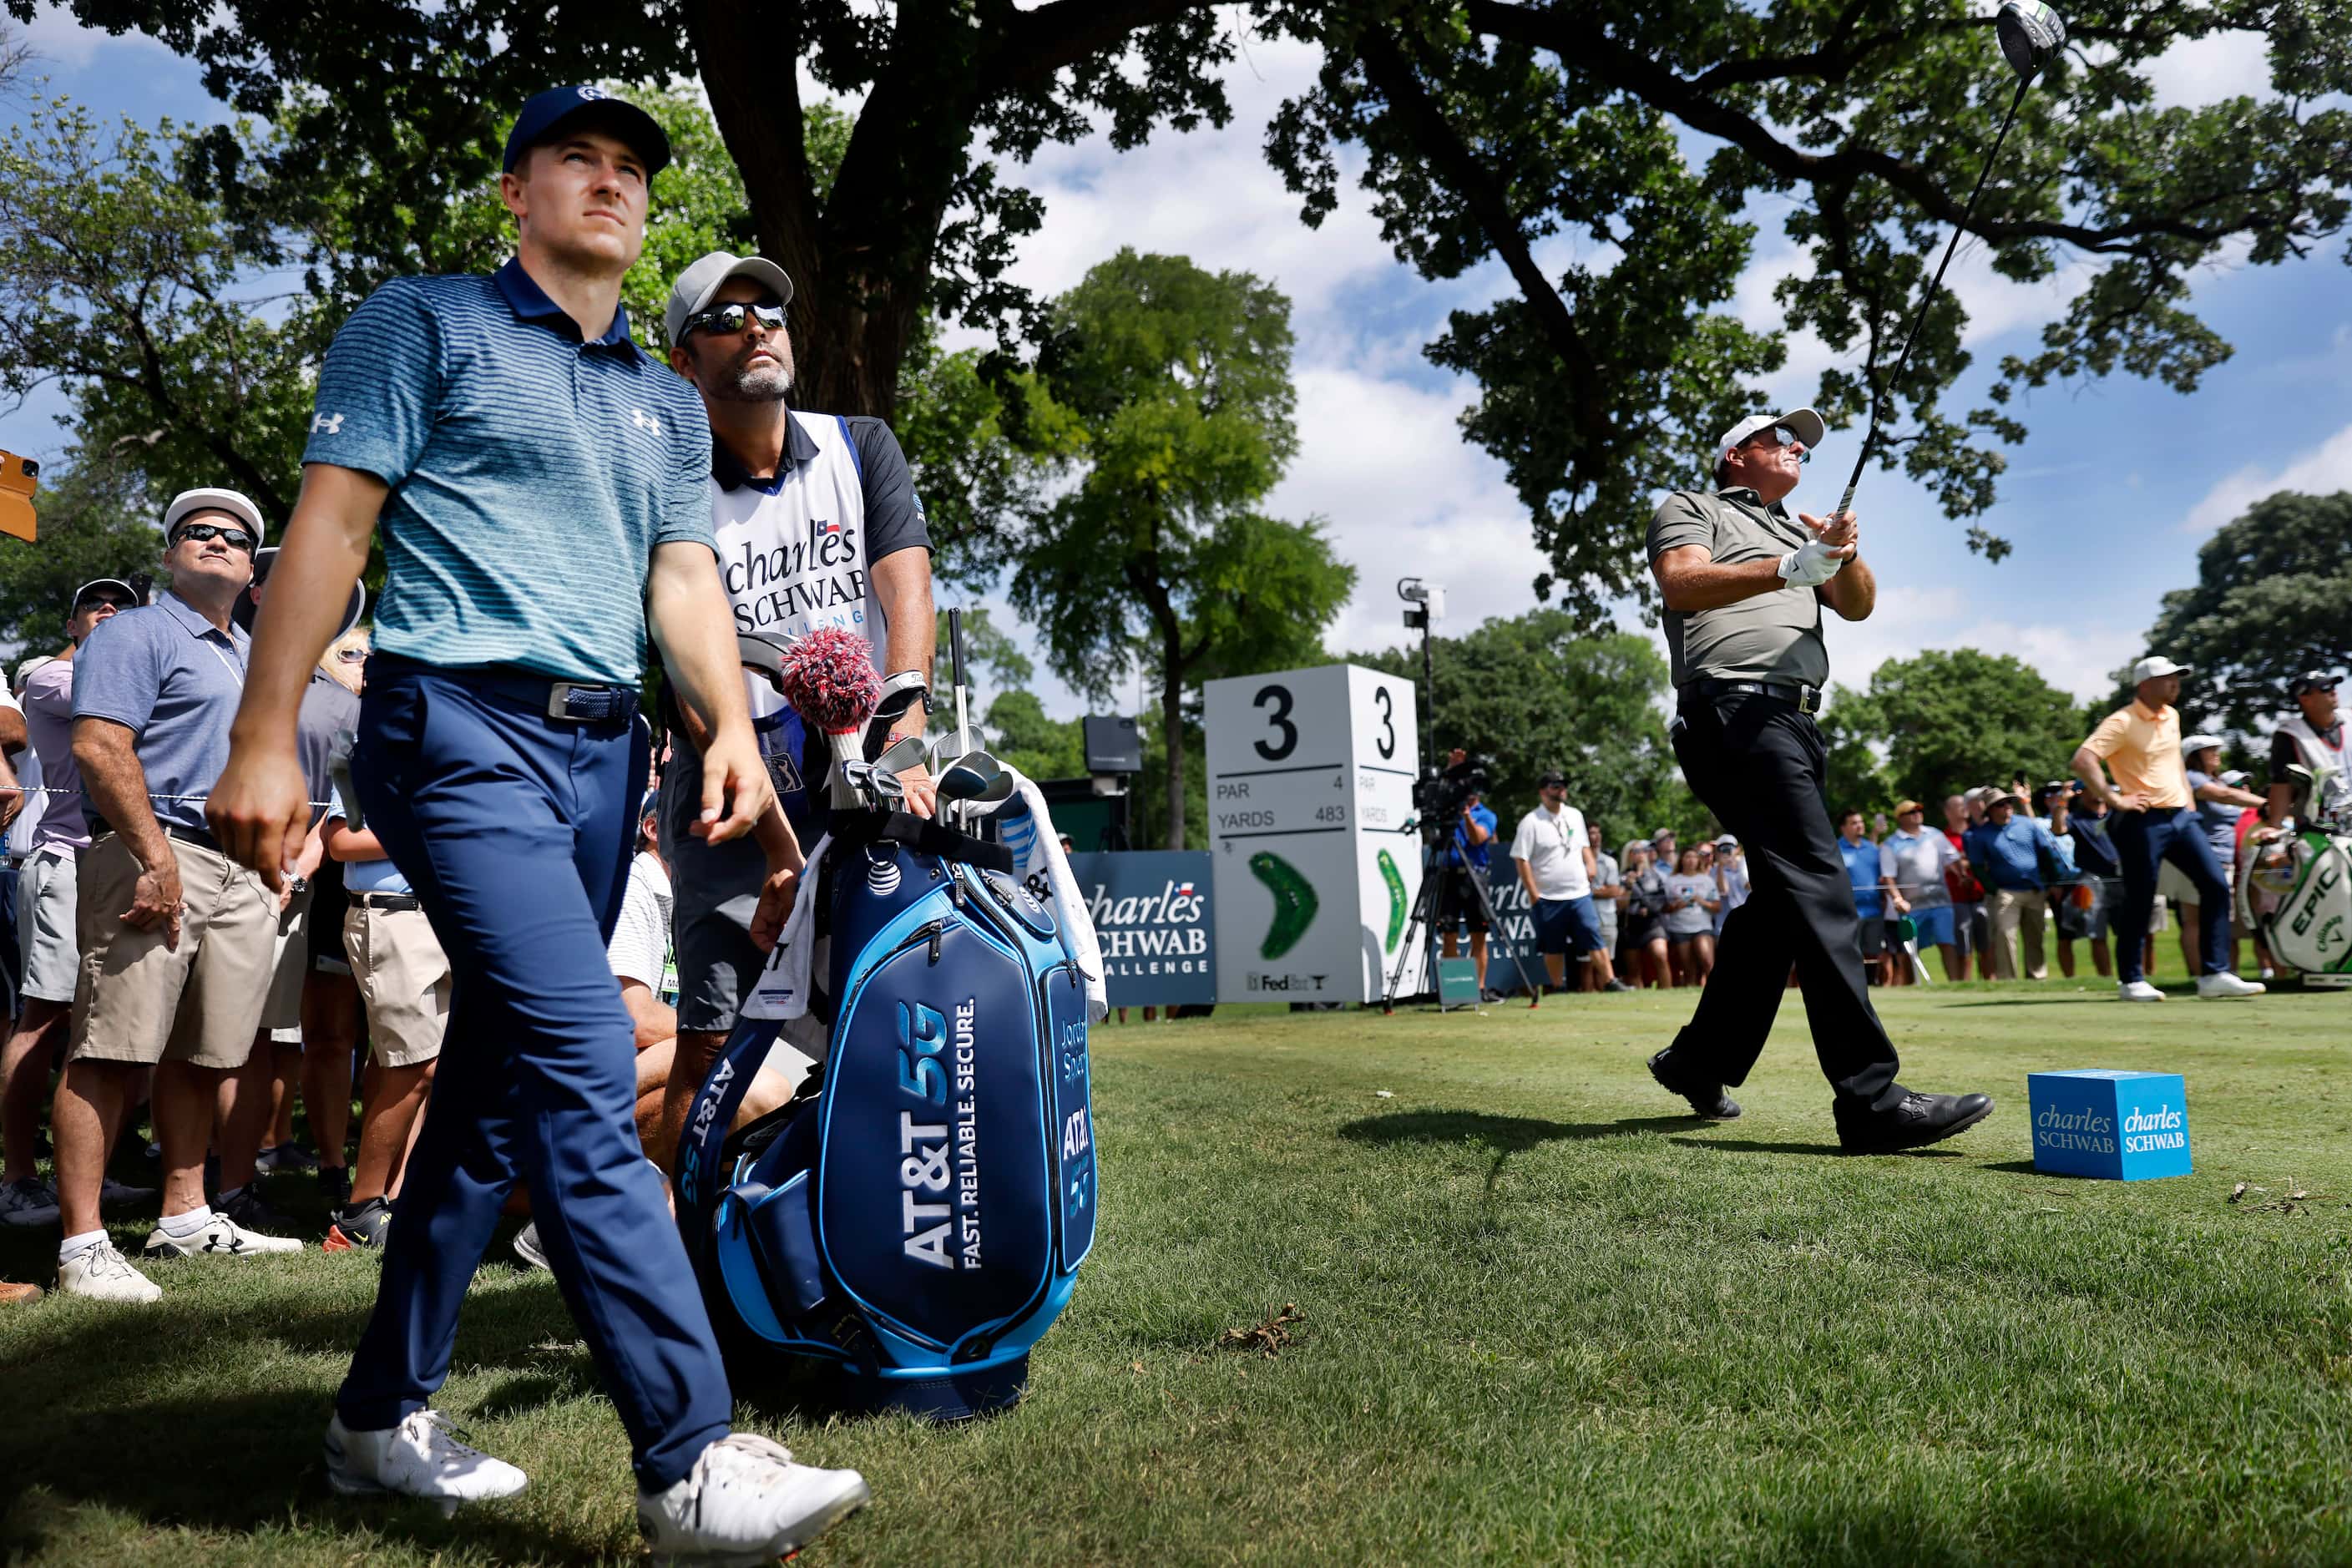 Professional golfer Jordan Spieth (left) watches Phil Mickelson's drive off the No. 3 tee...